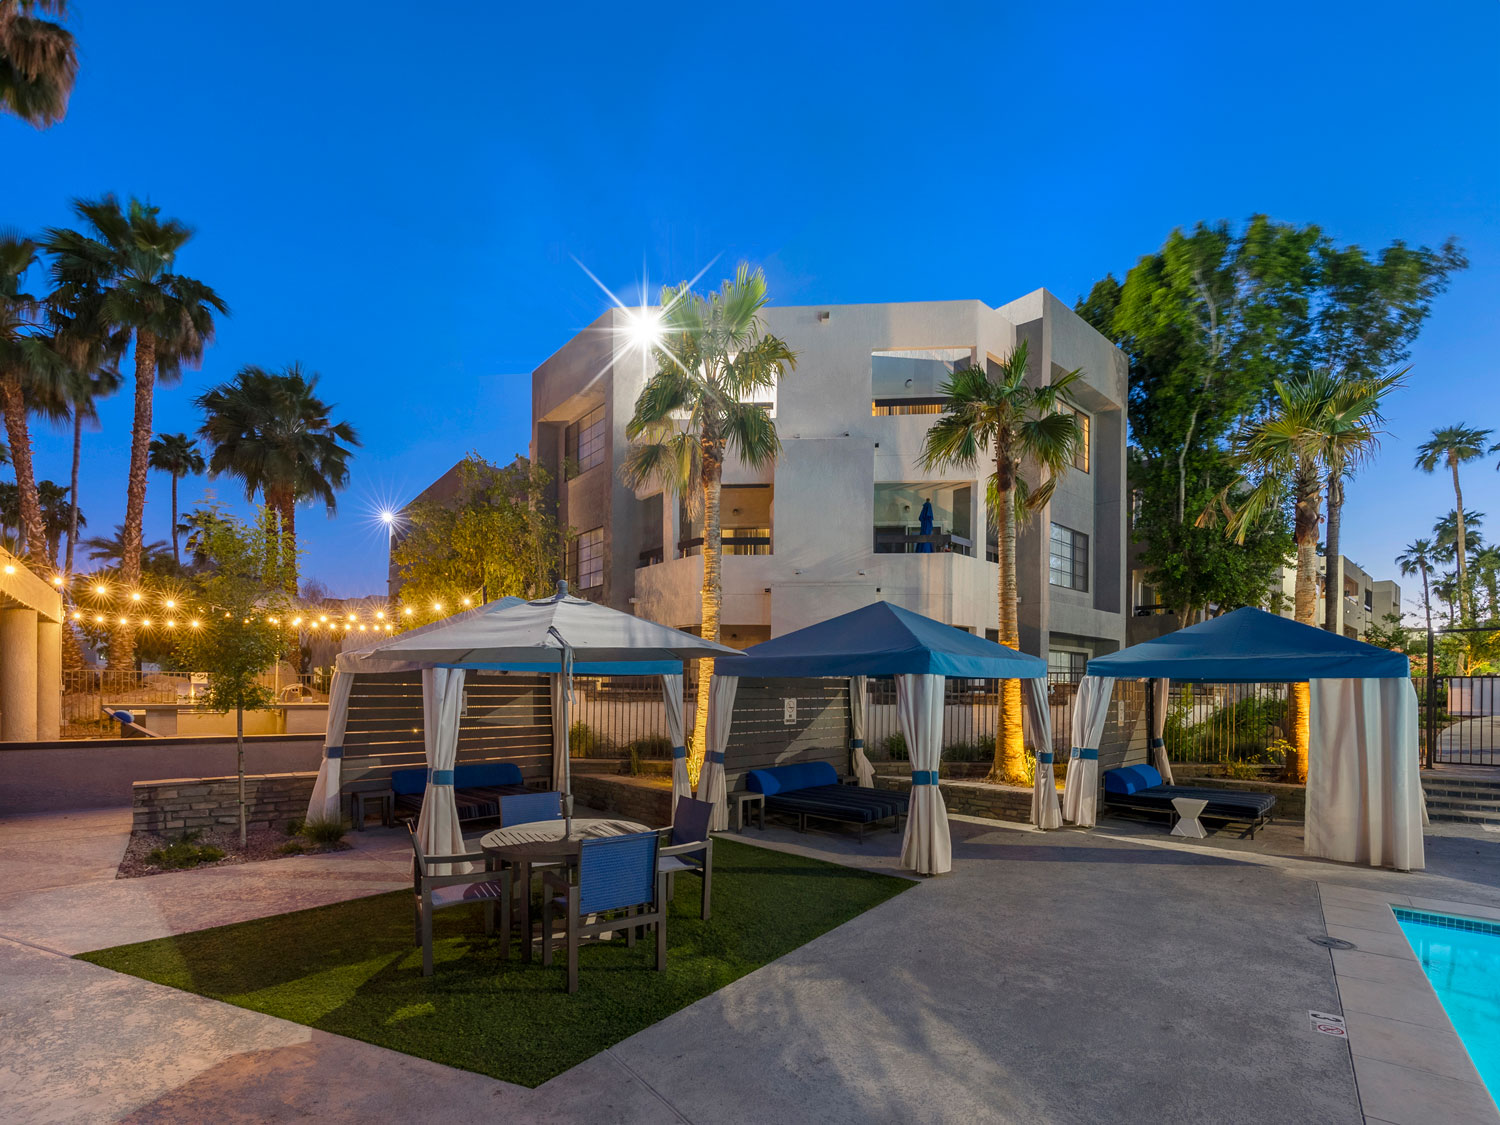 Outdoor canopies around the pool area at Paradise Lakes Apartments with blue sky